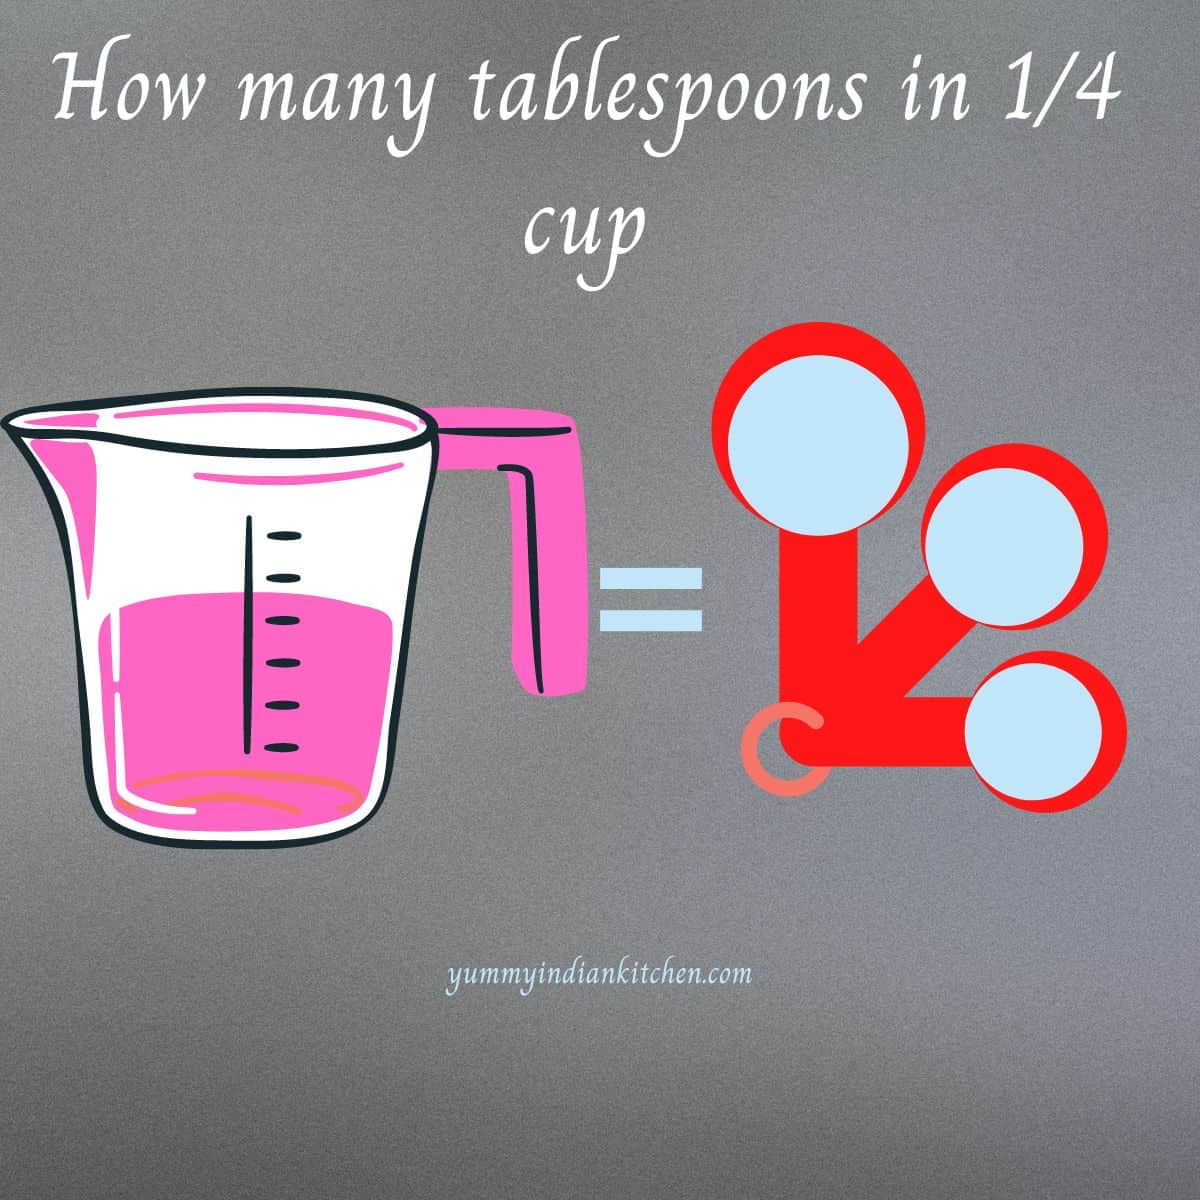 measuring cup equal to tablespoons shown in the image to represent how many tablespoons are in ¼ cup